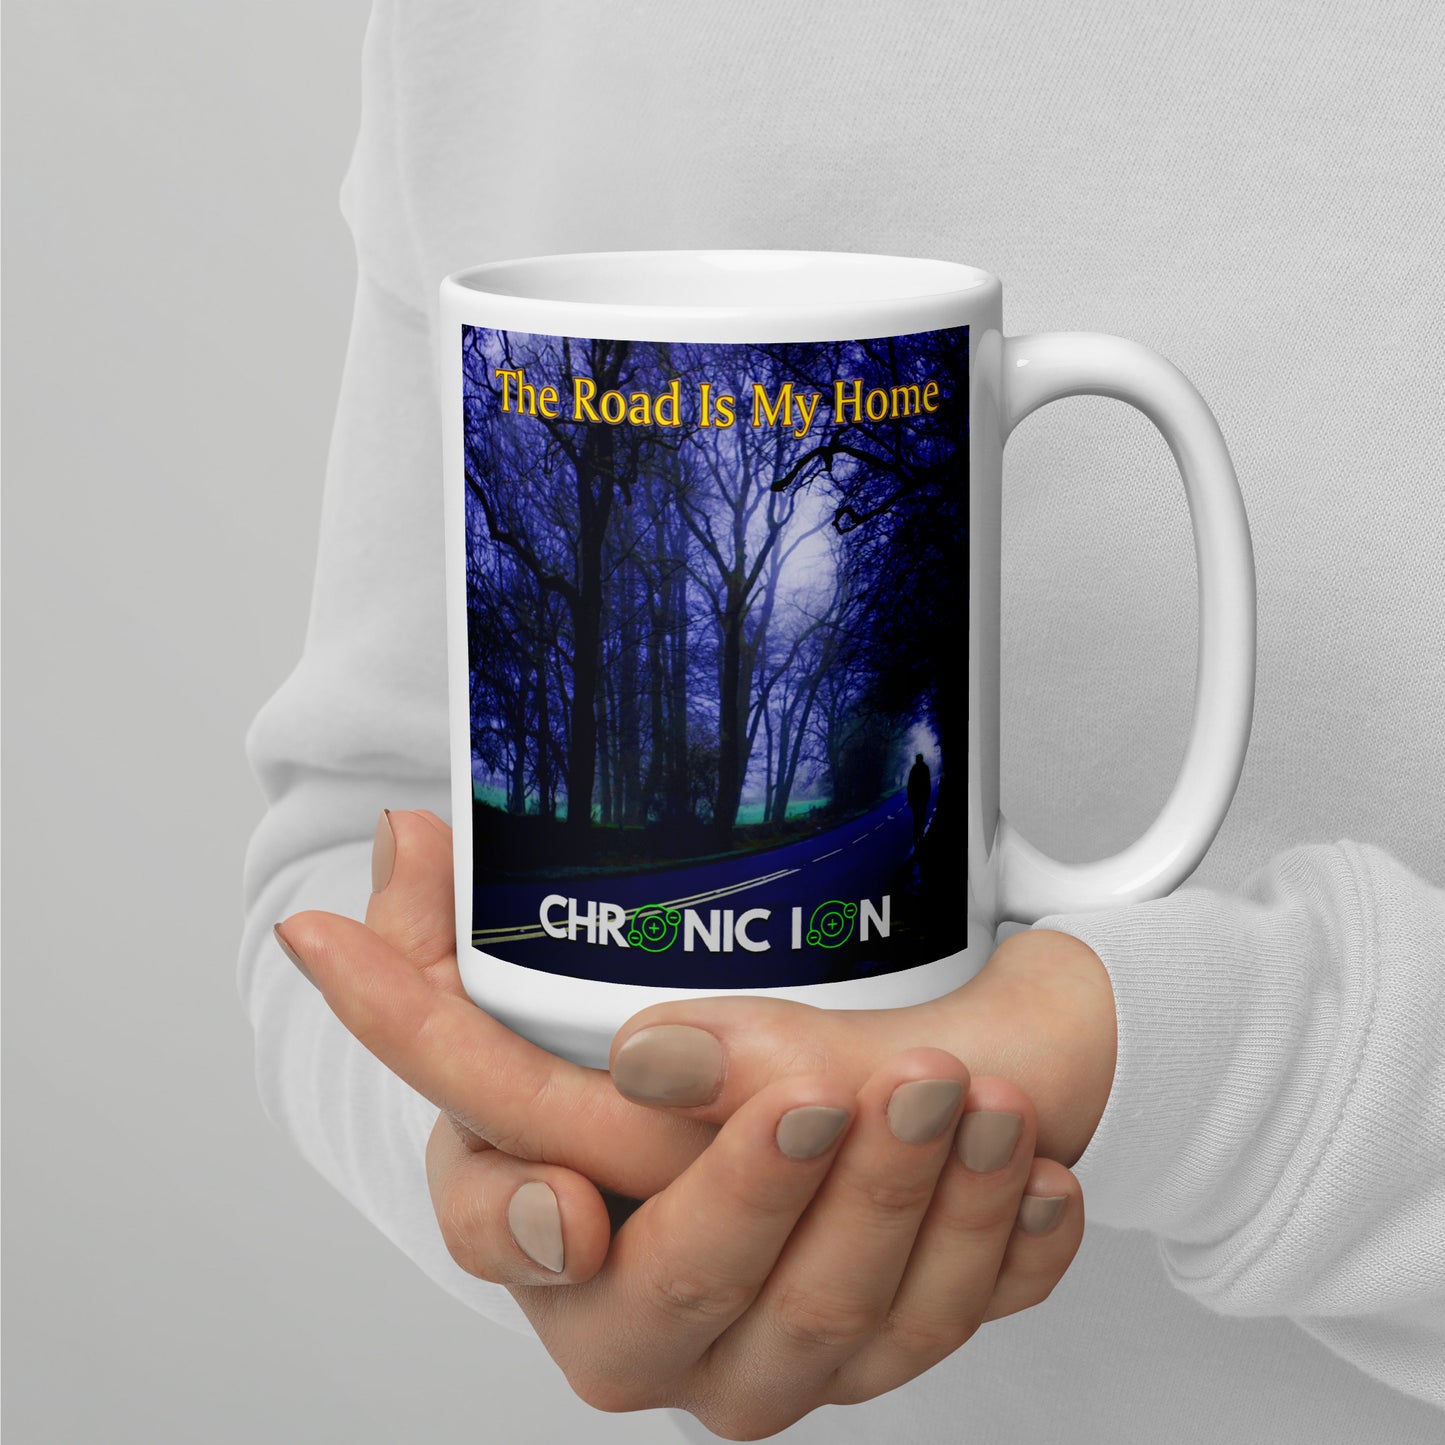 Chronic Ion - The Road Is My Home White Glossy Mug